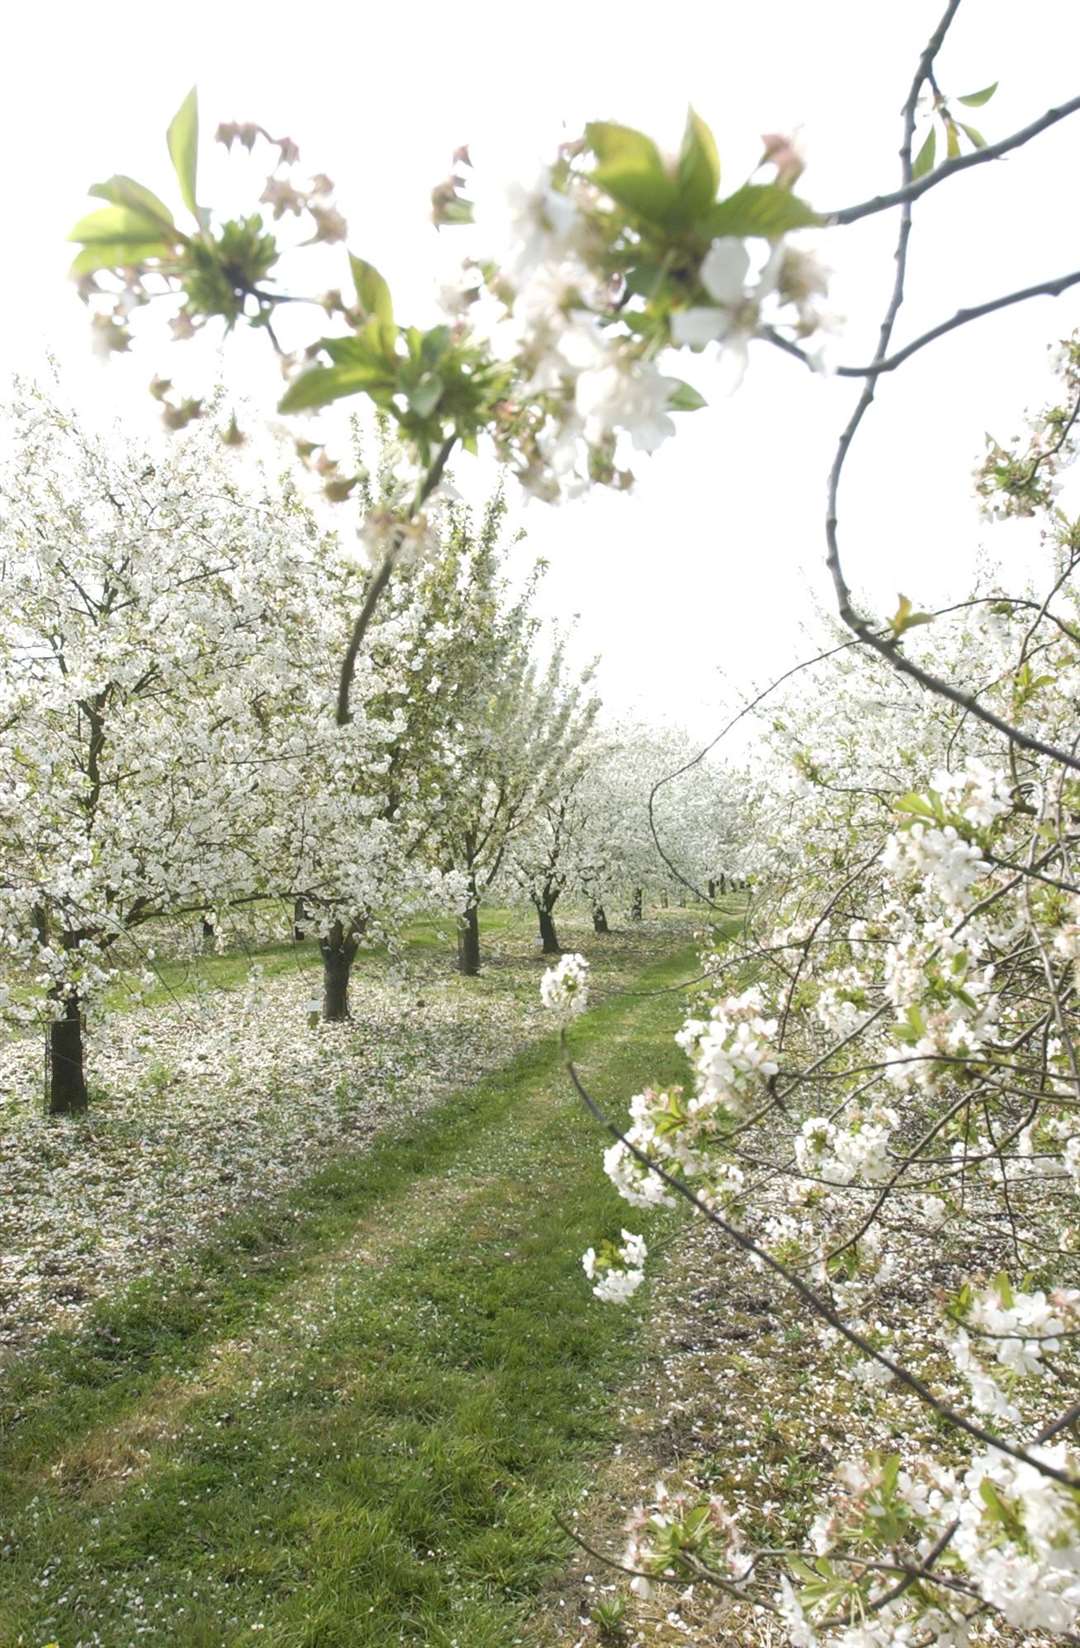 You can walk through the orchards. Picture: Chris Davey